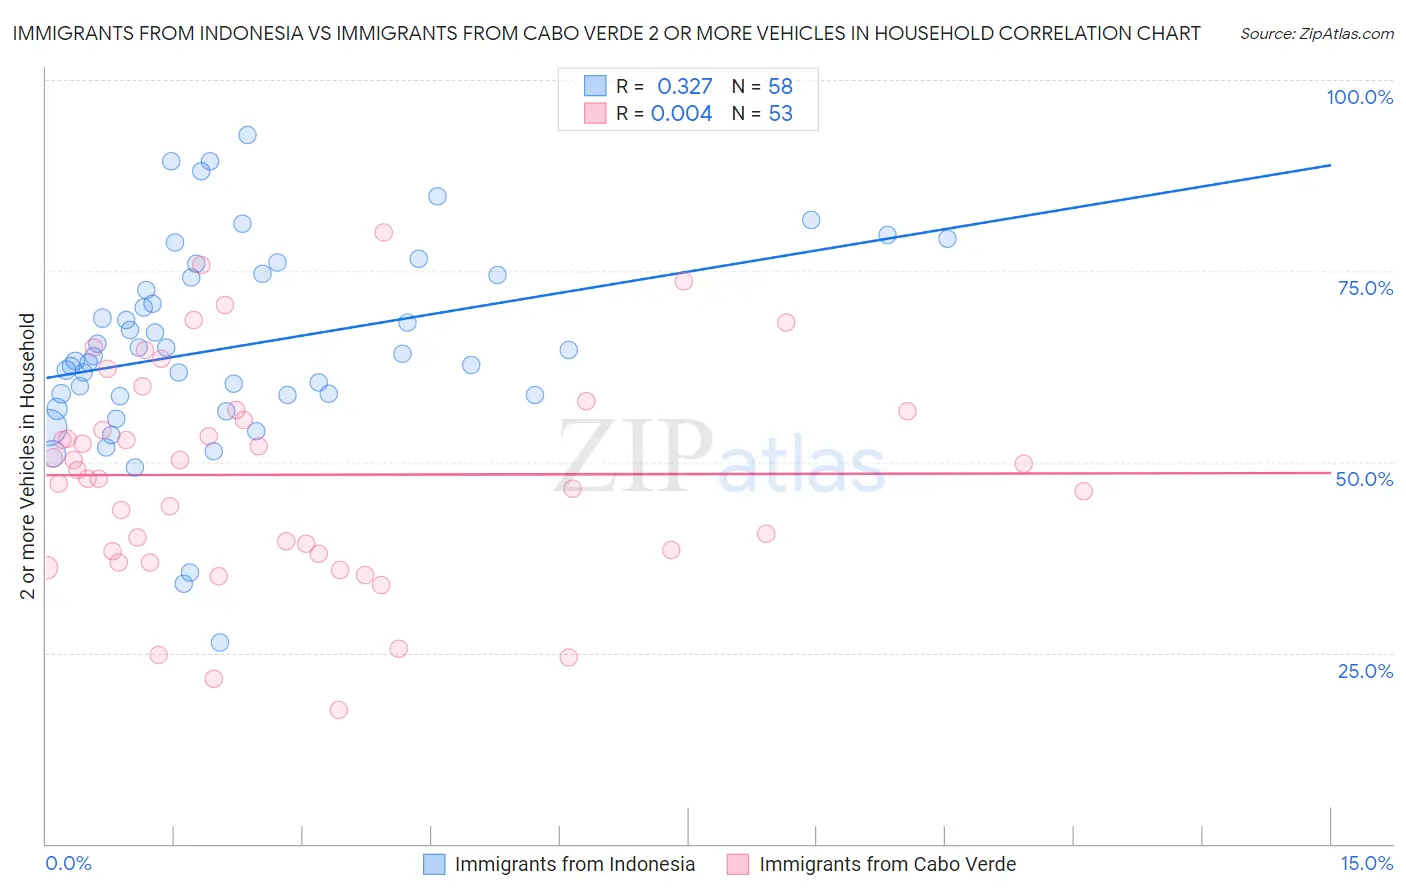 Immigrants from Indonesia vs Immigrants from Cabo Verde 2 or more Vehicles in Household